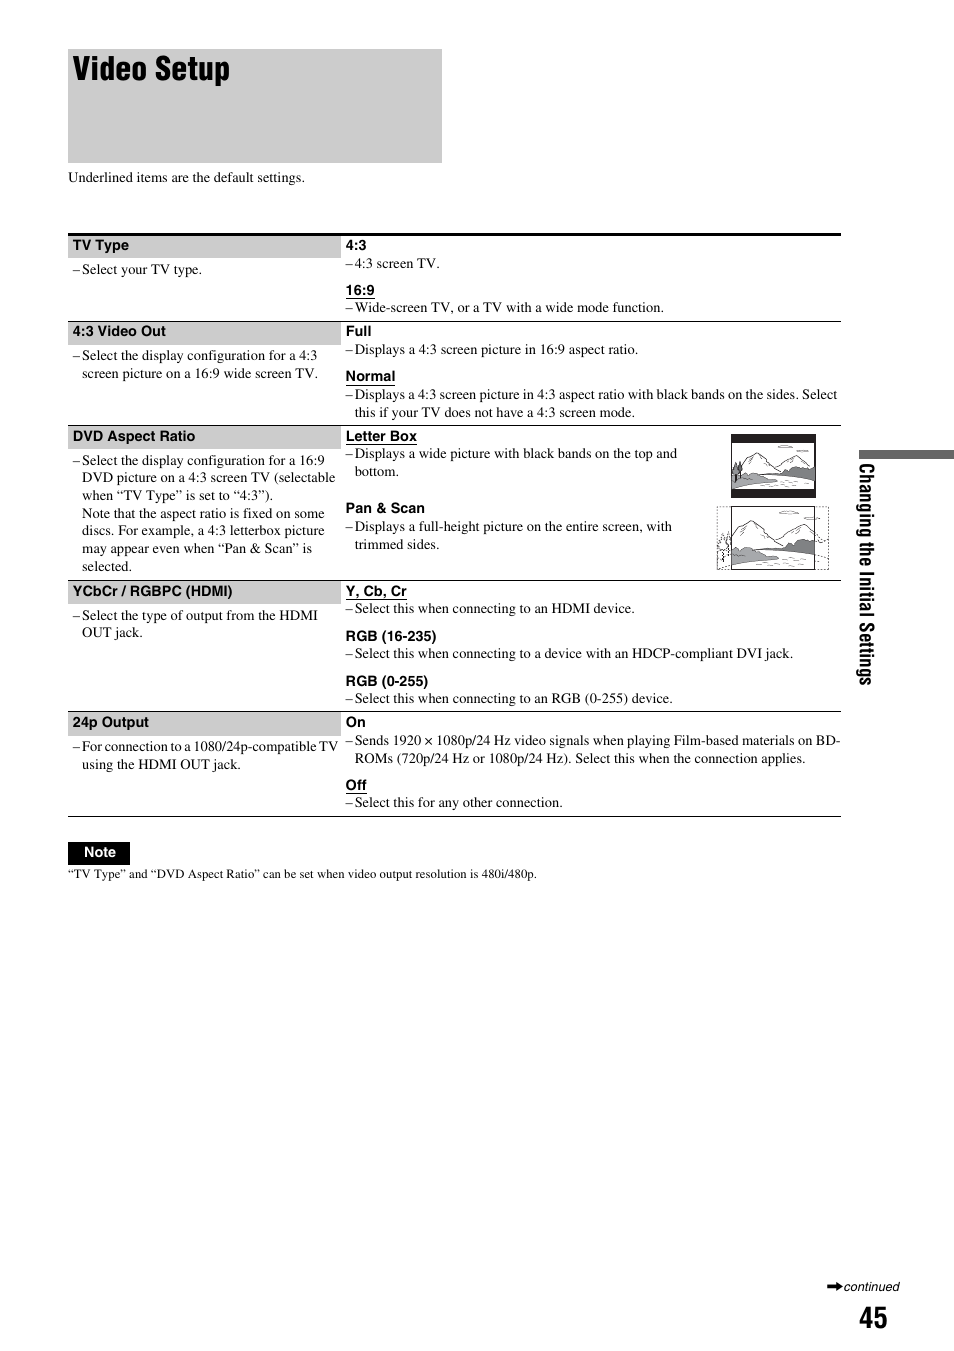 Video setup, Changing th e initial sett ings | Sony 3-270-909-11(1) User Manual | Page 45 / 71